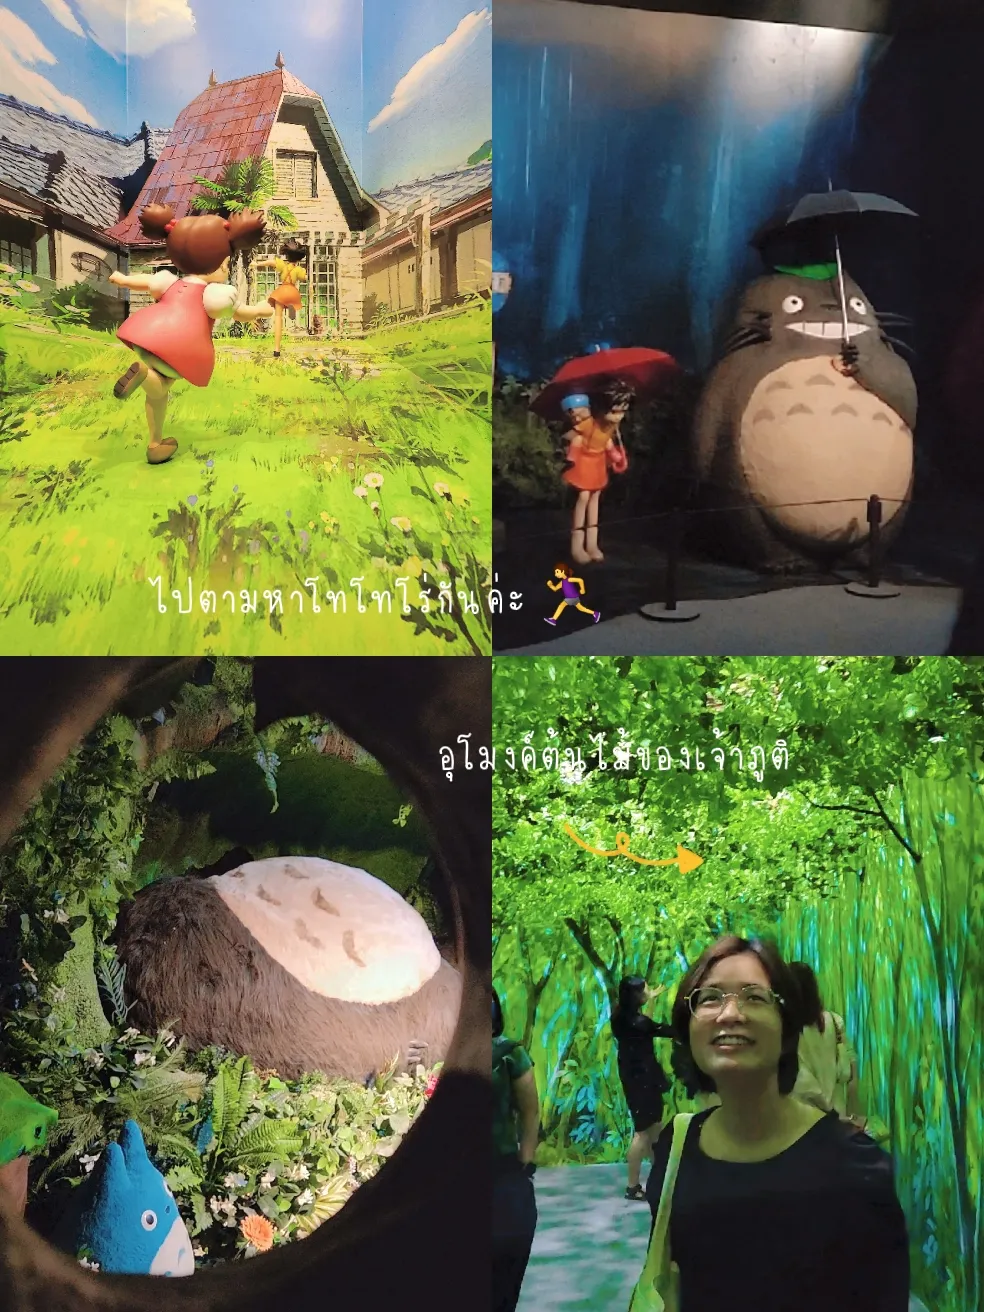 Take a tour of The World of Studio Ghibli's exhibition